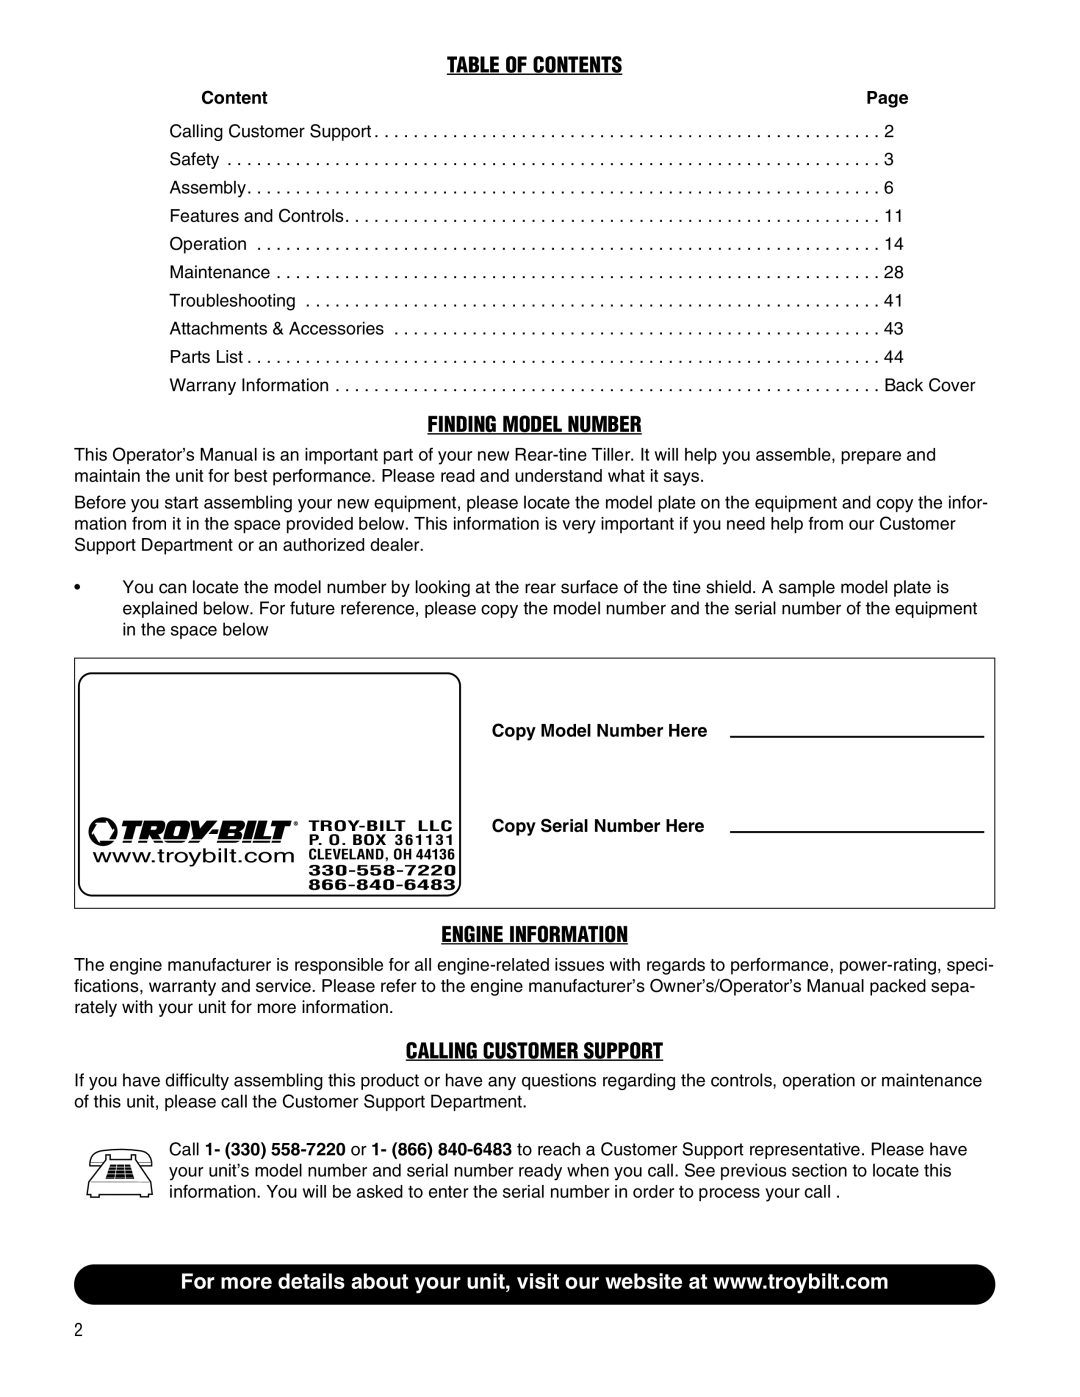 Troy-Bilt E682J-Horse manual Table Of Contents, Finding Model Number, Engine Information, Calling Customer Support 